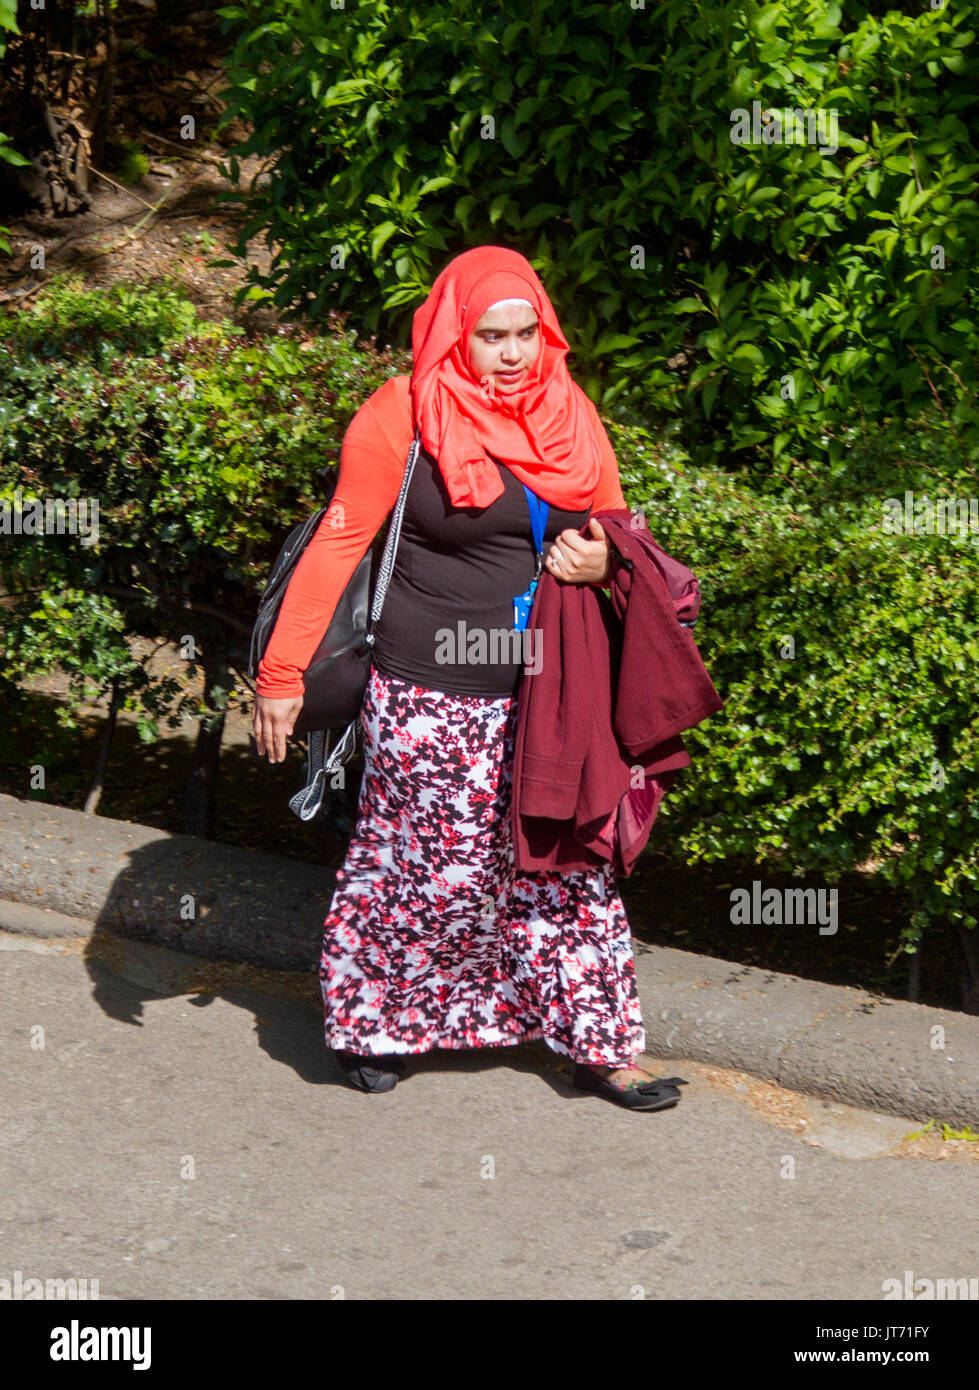 Young Muslim woman, wearing colourful head scarf and skirt walking along street in city of York, England Stock Photo